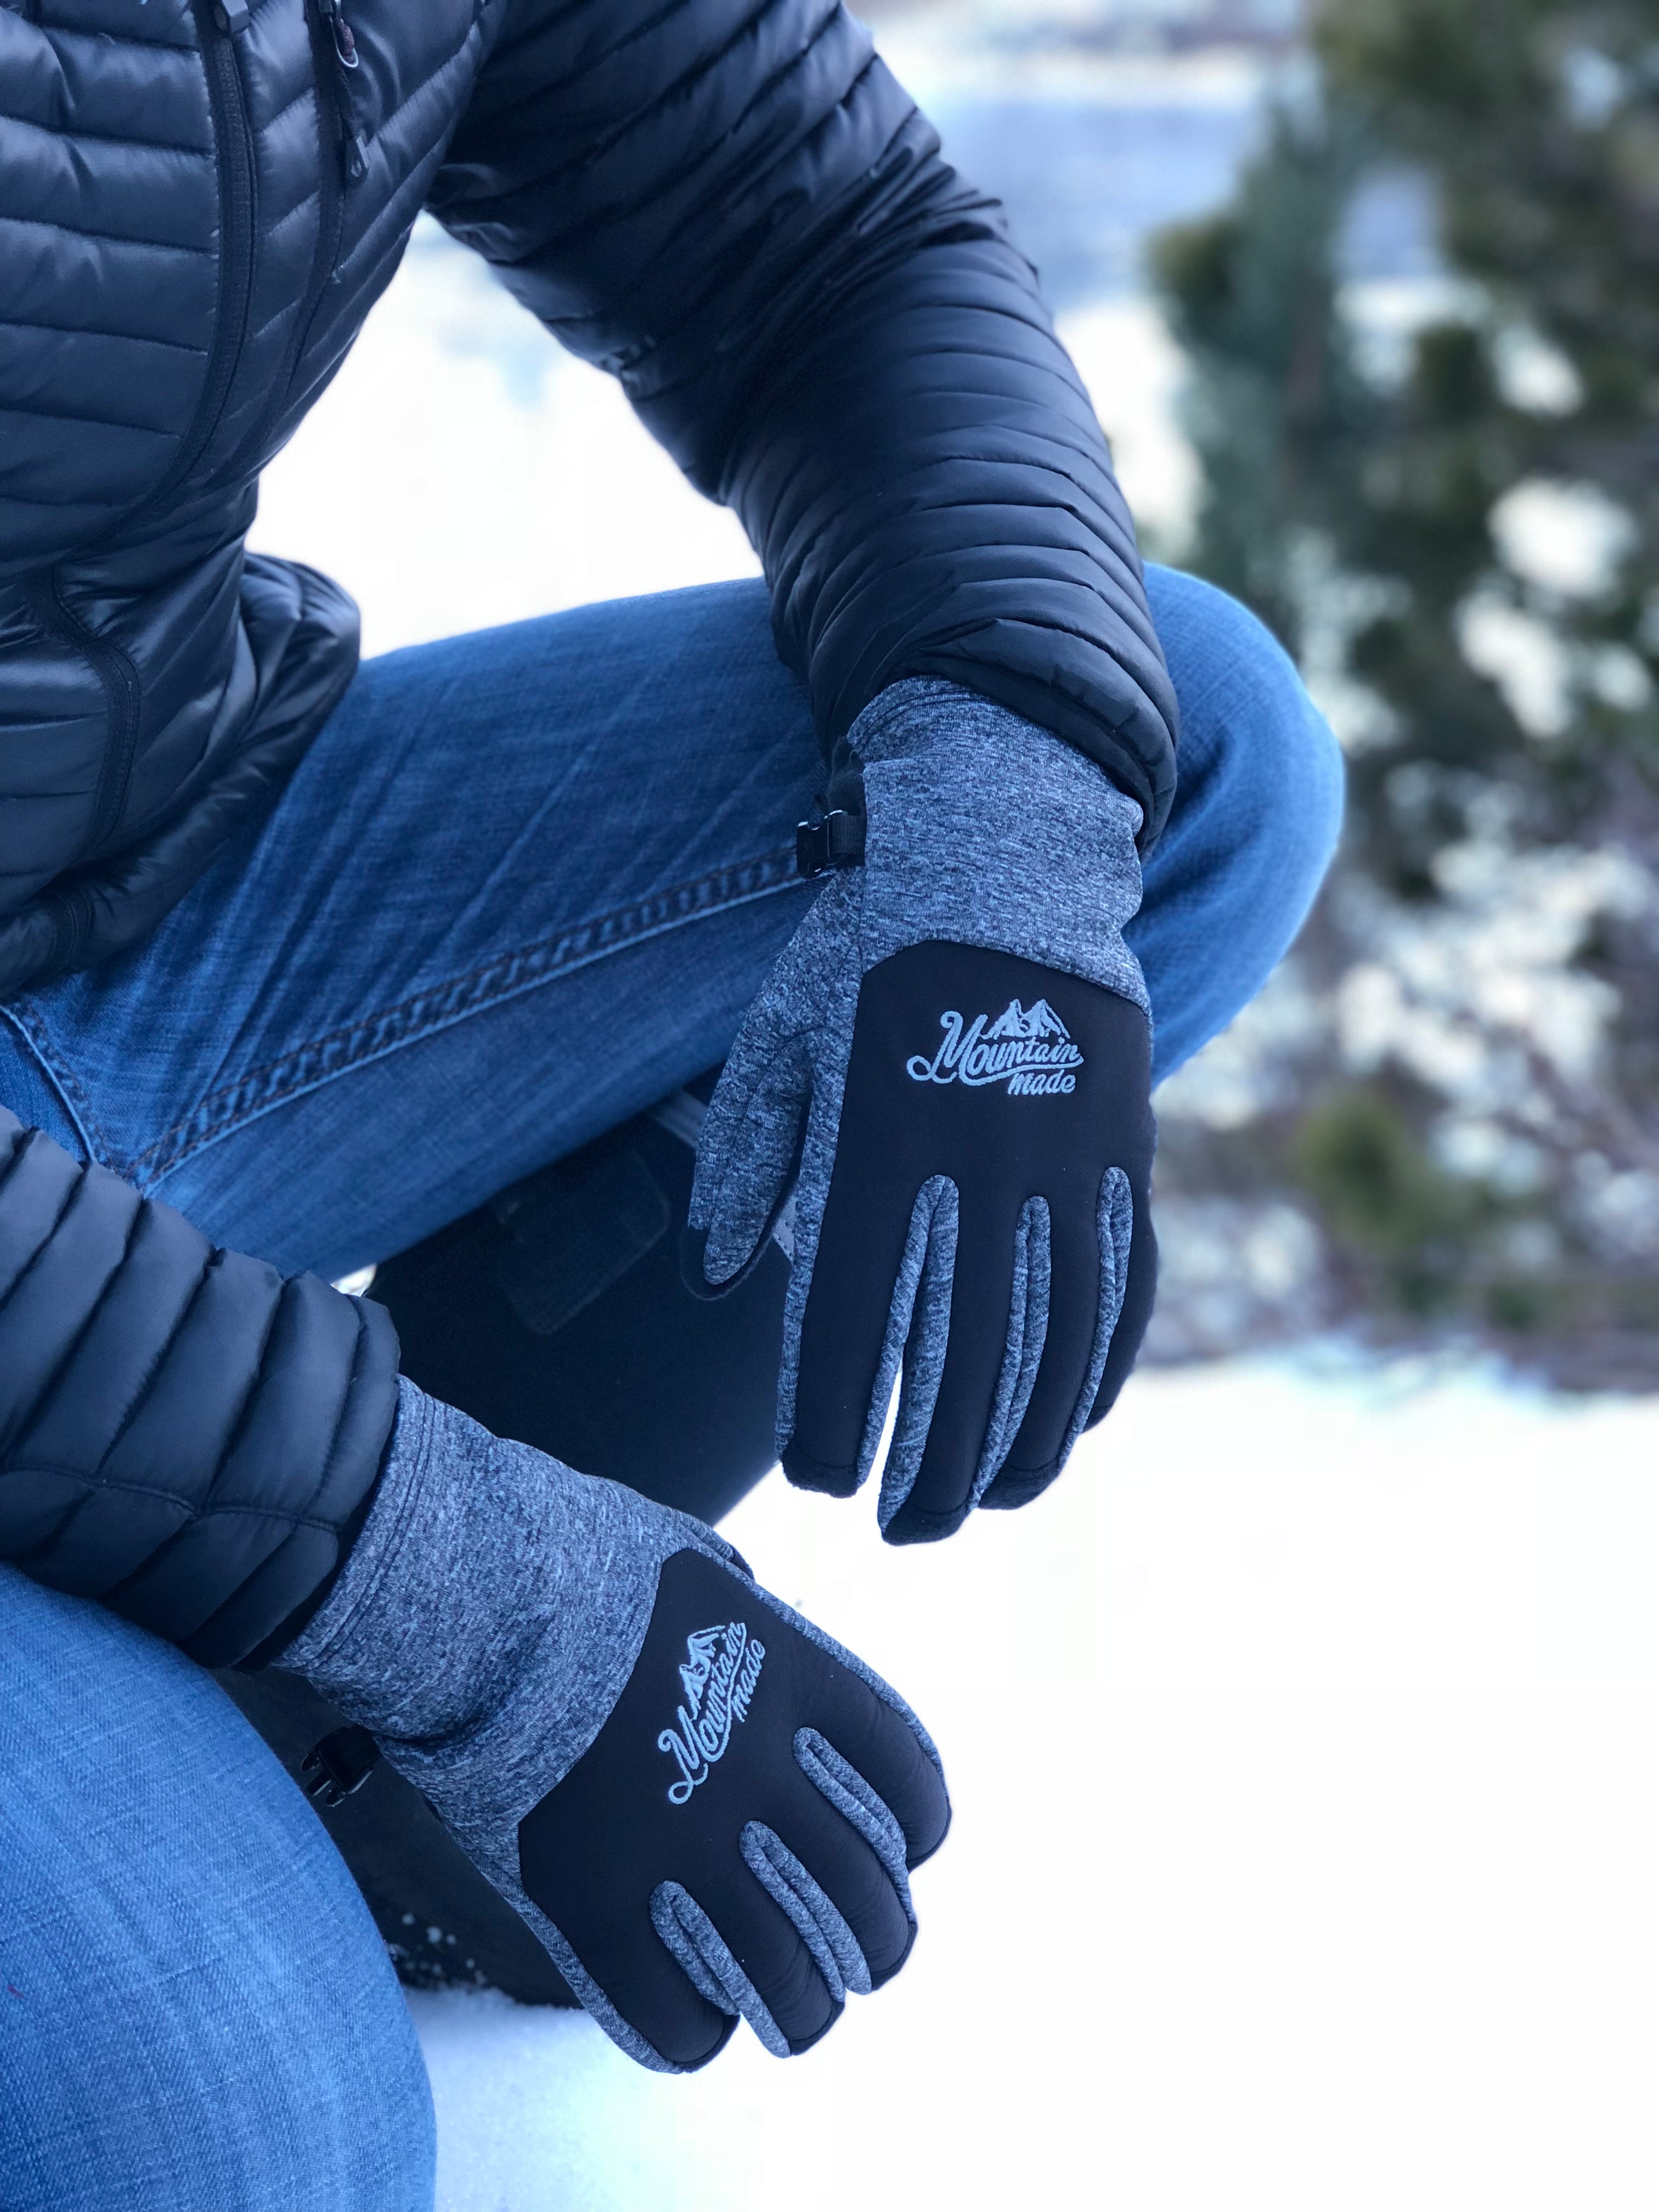 FREE Gloves | Made SHIPPING! + Mountain 4 of Pack Bierstadt